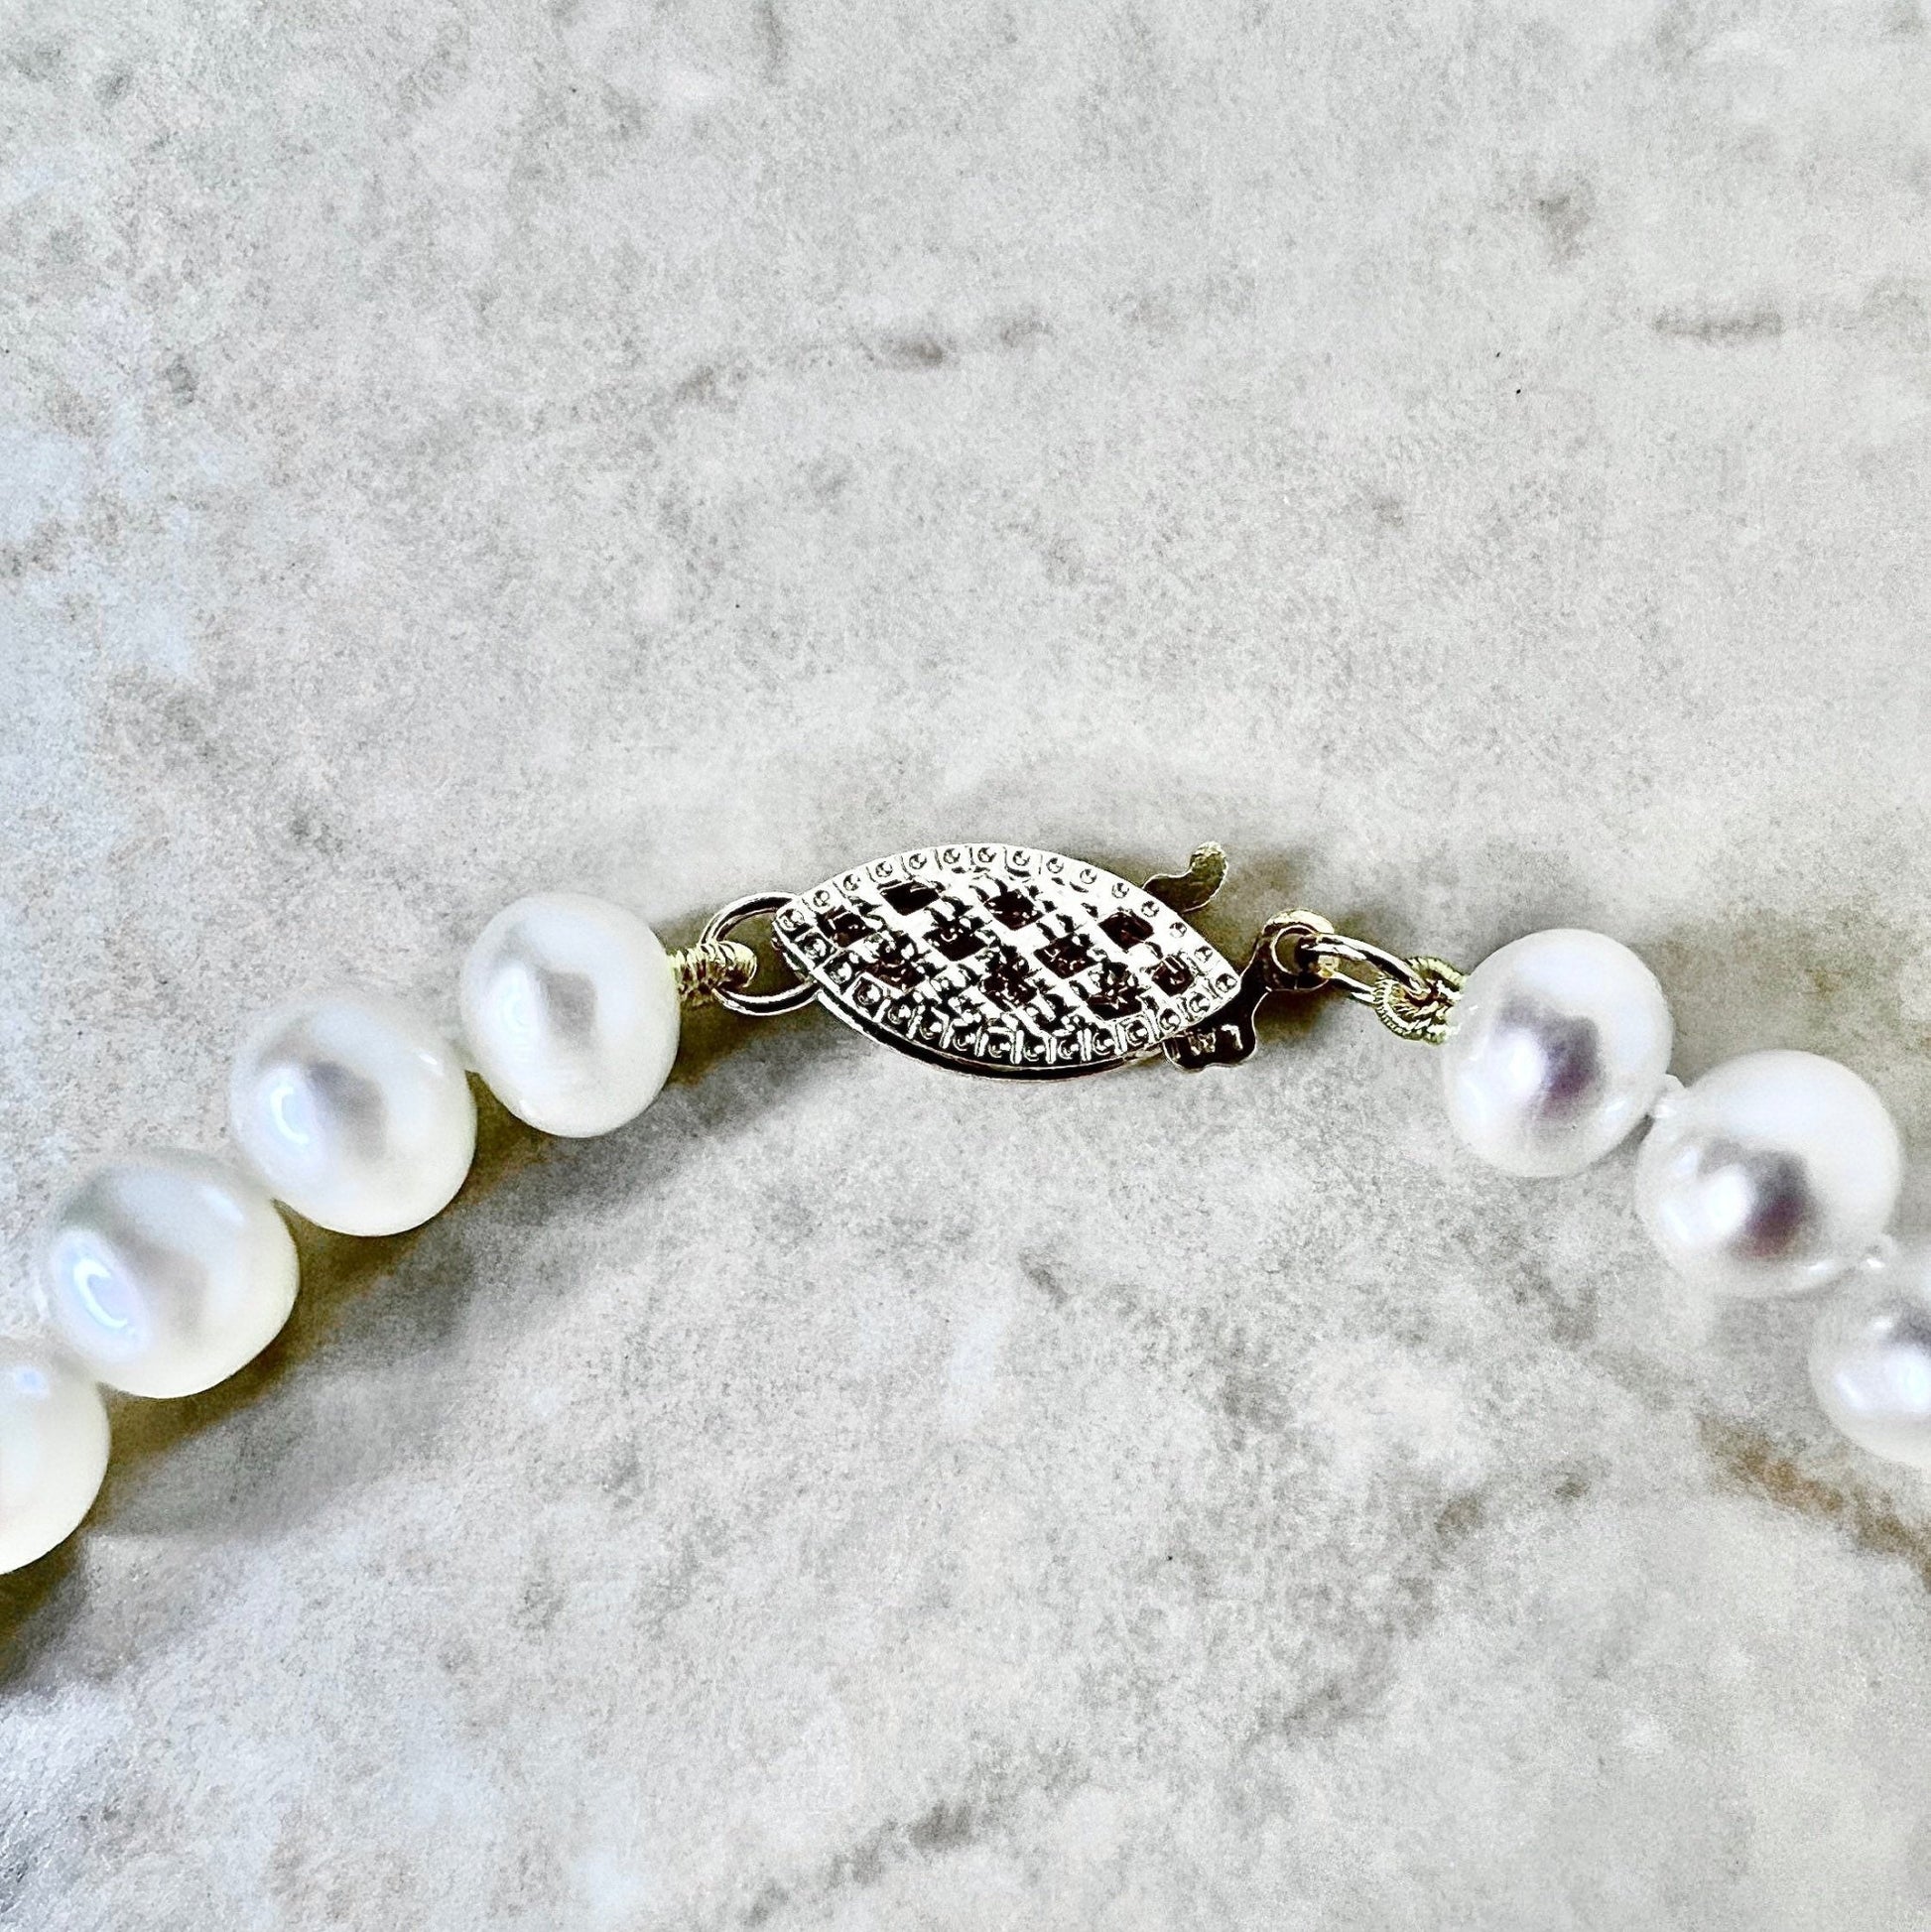 Pearl Necklace Freshwater White Pearl Strand With 14K Yellow Gold Clasp - Genuine Pearls - Birthday Gift -June Birthstone -Best Gift For Her